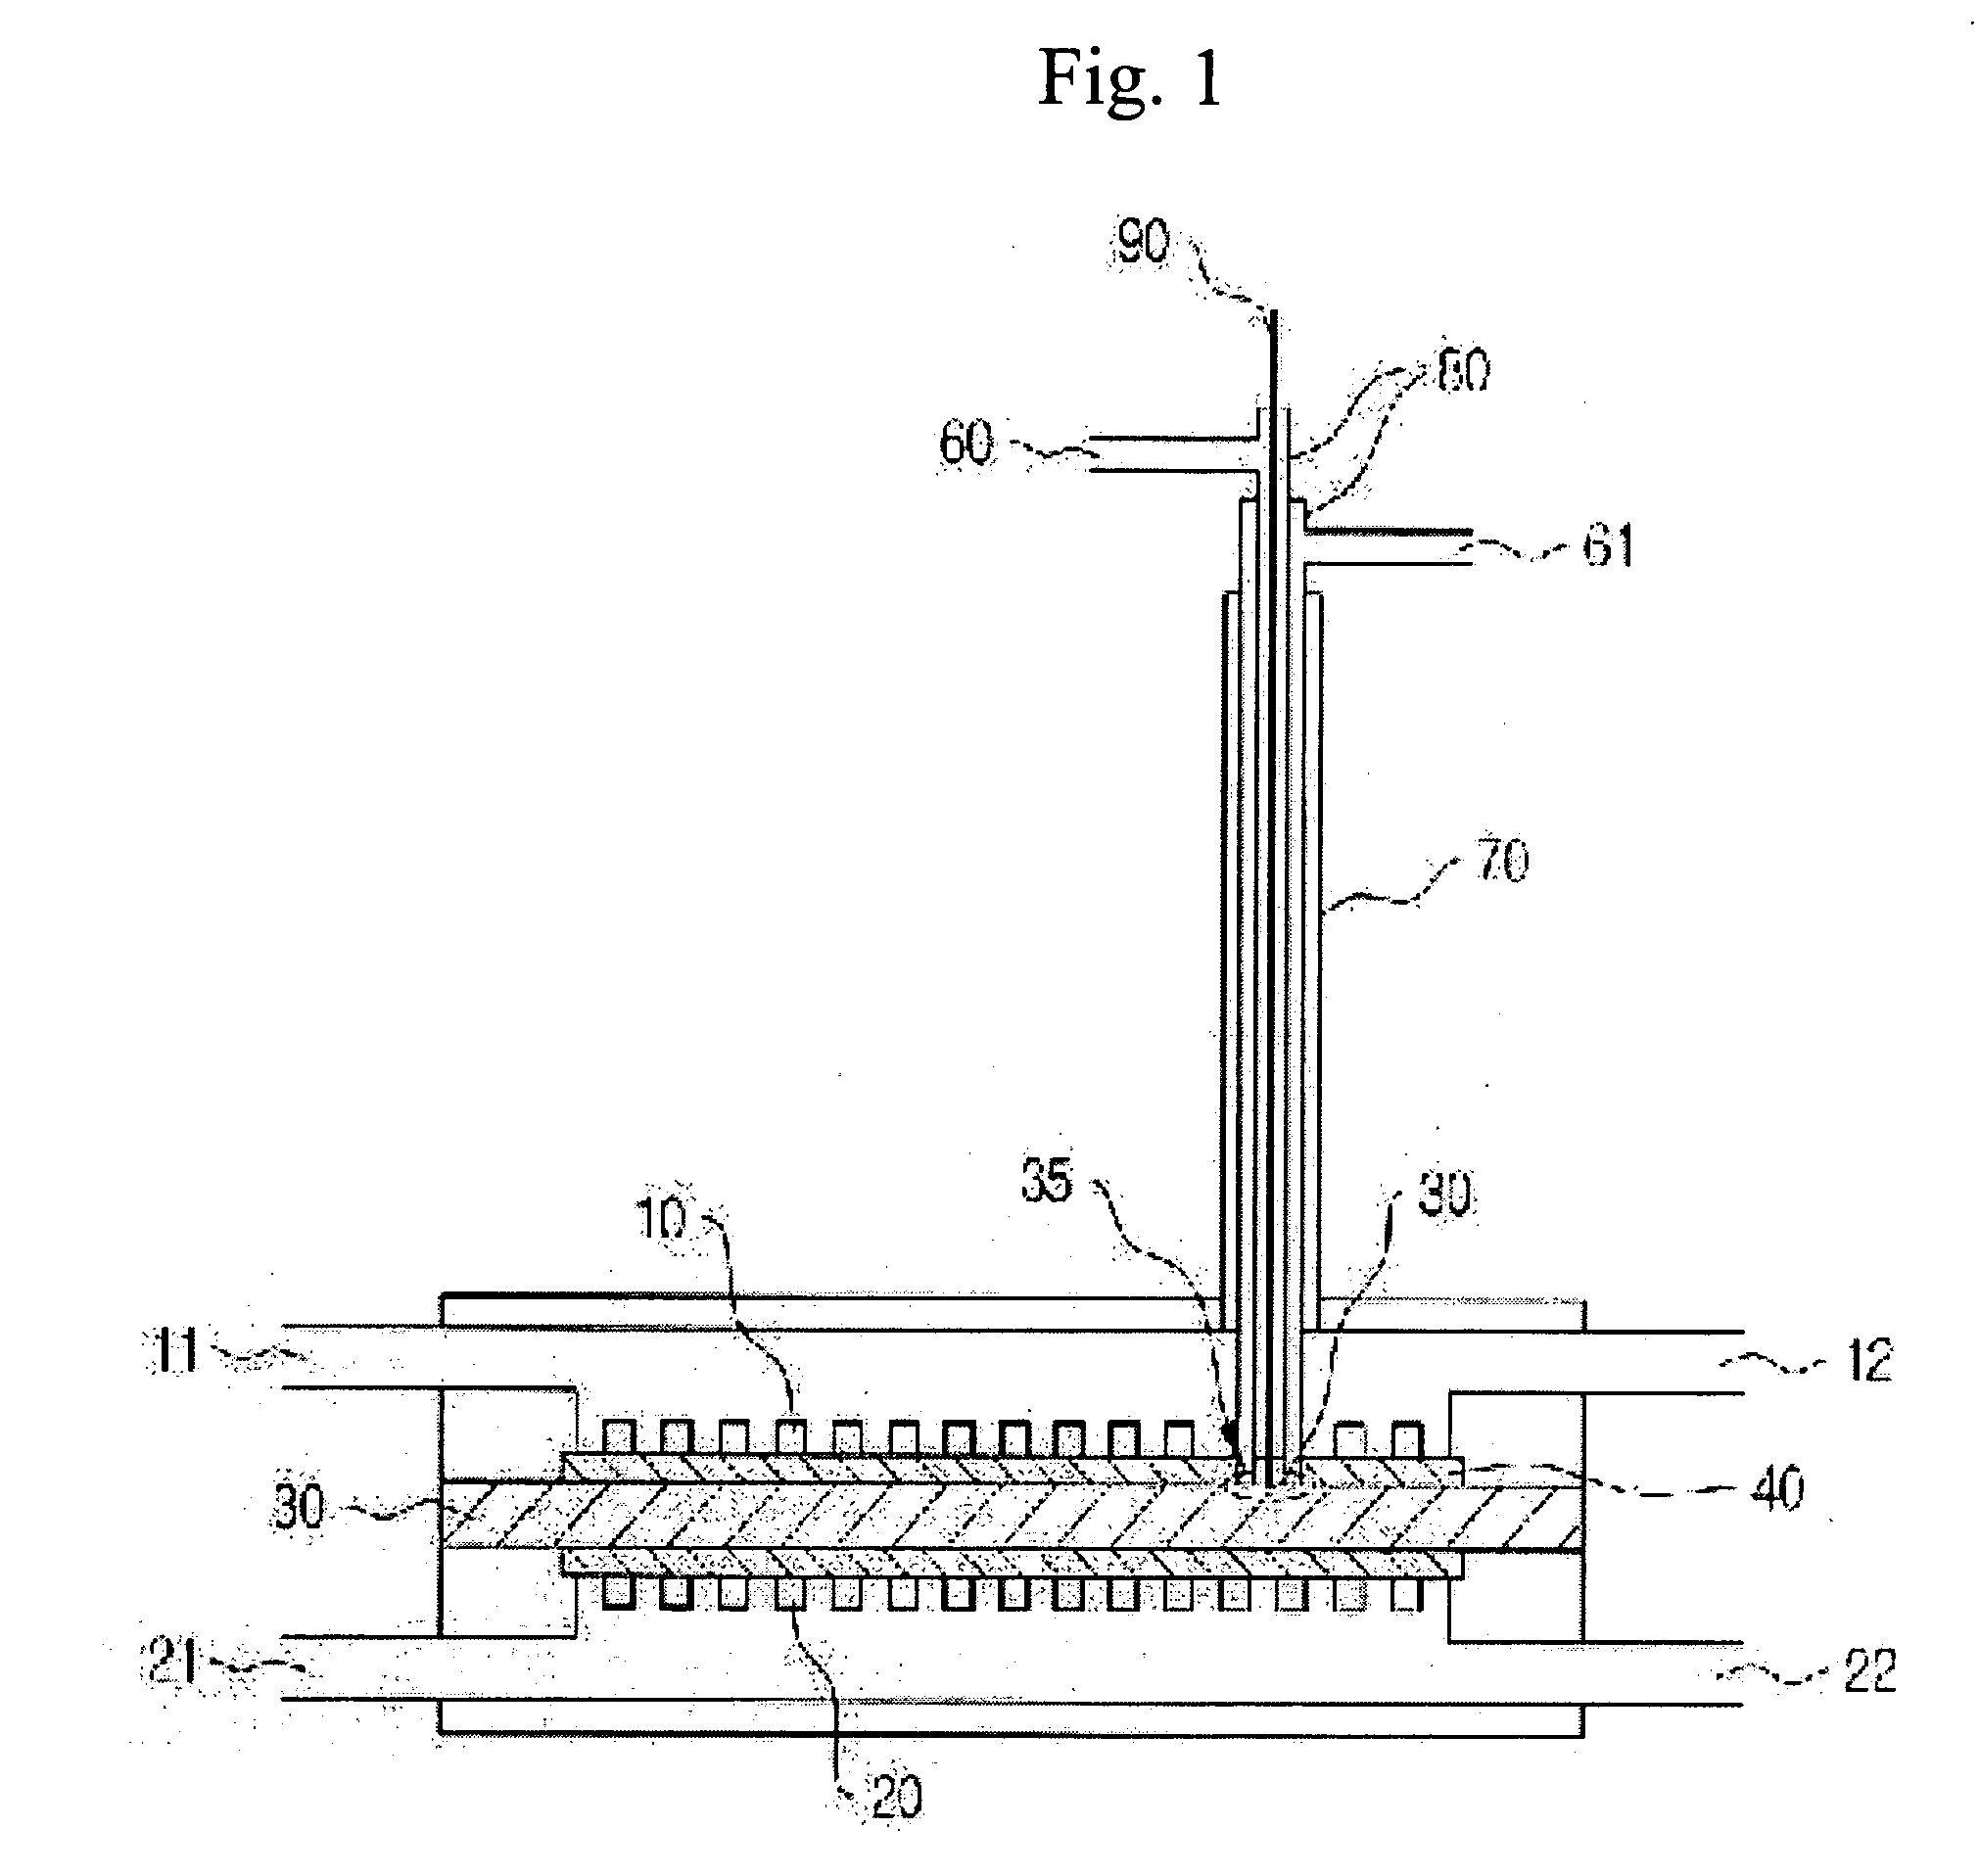 Three electrodes system cell for evaluation of performance of molten carbonate fuel cell